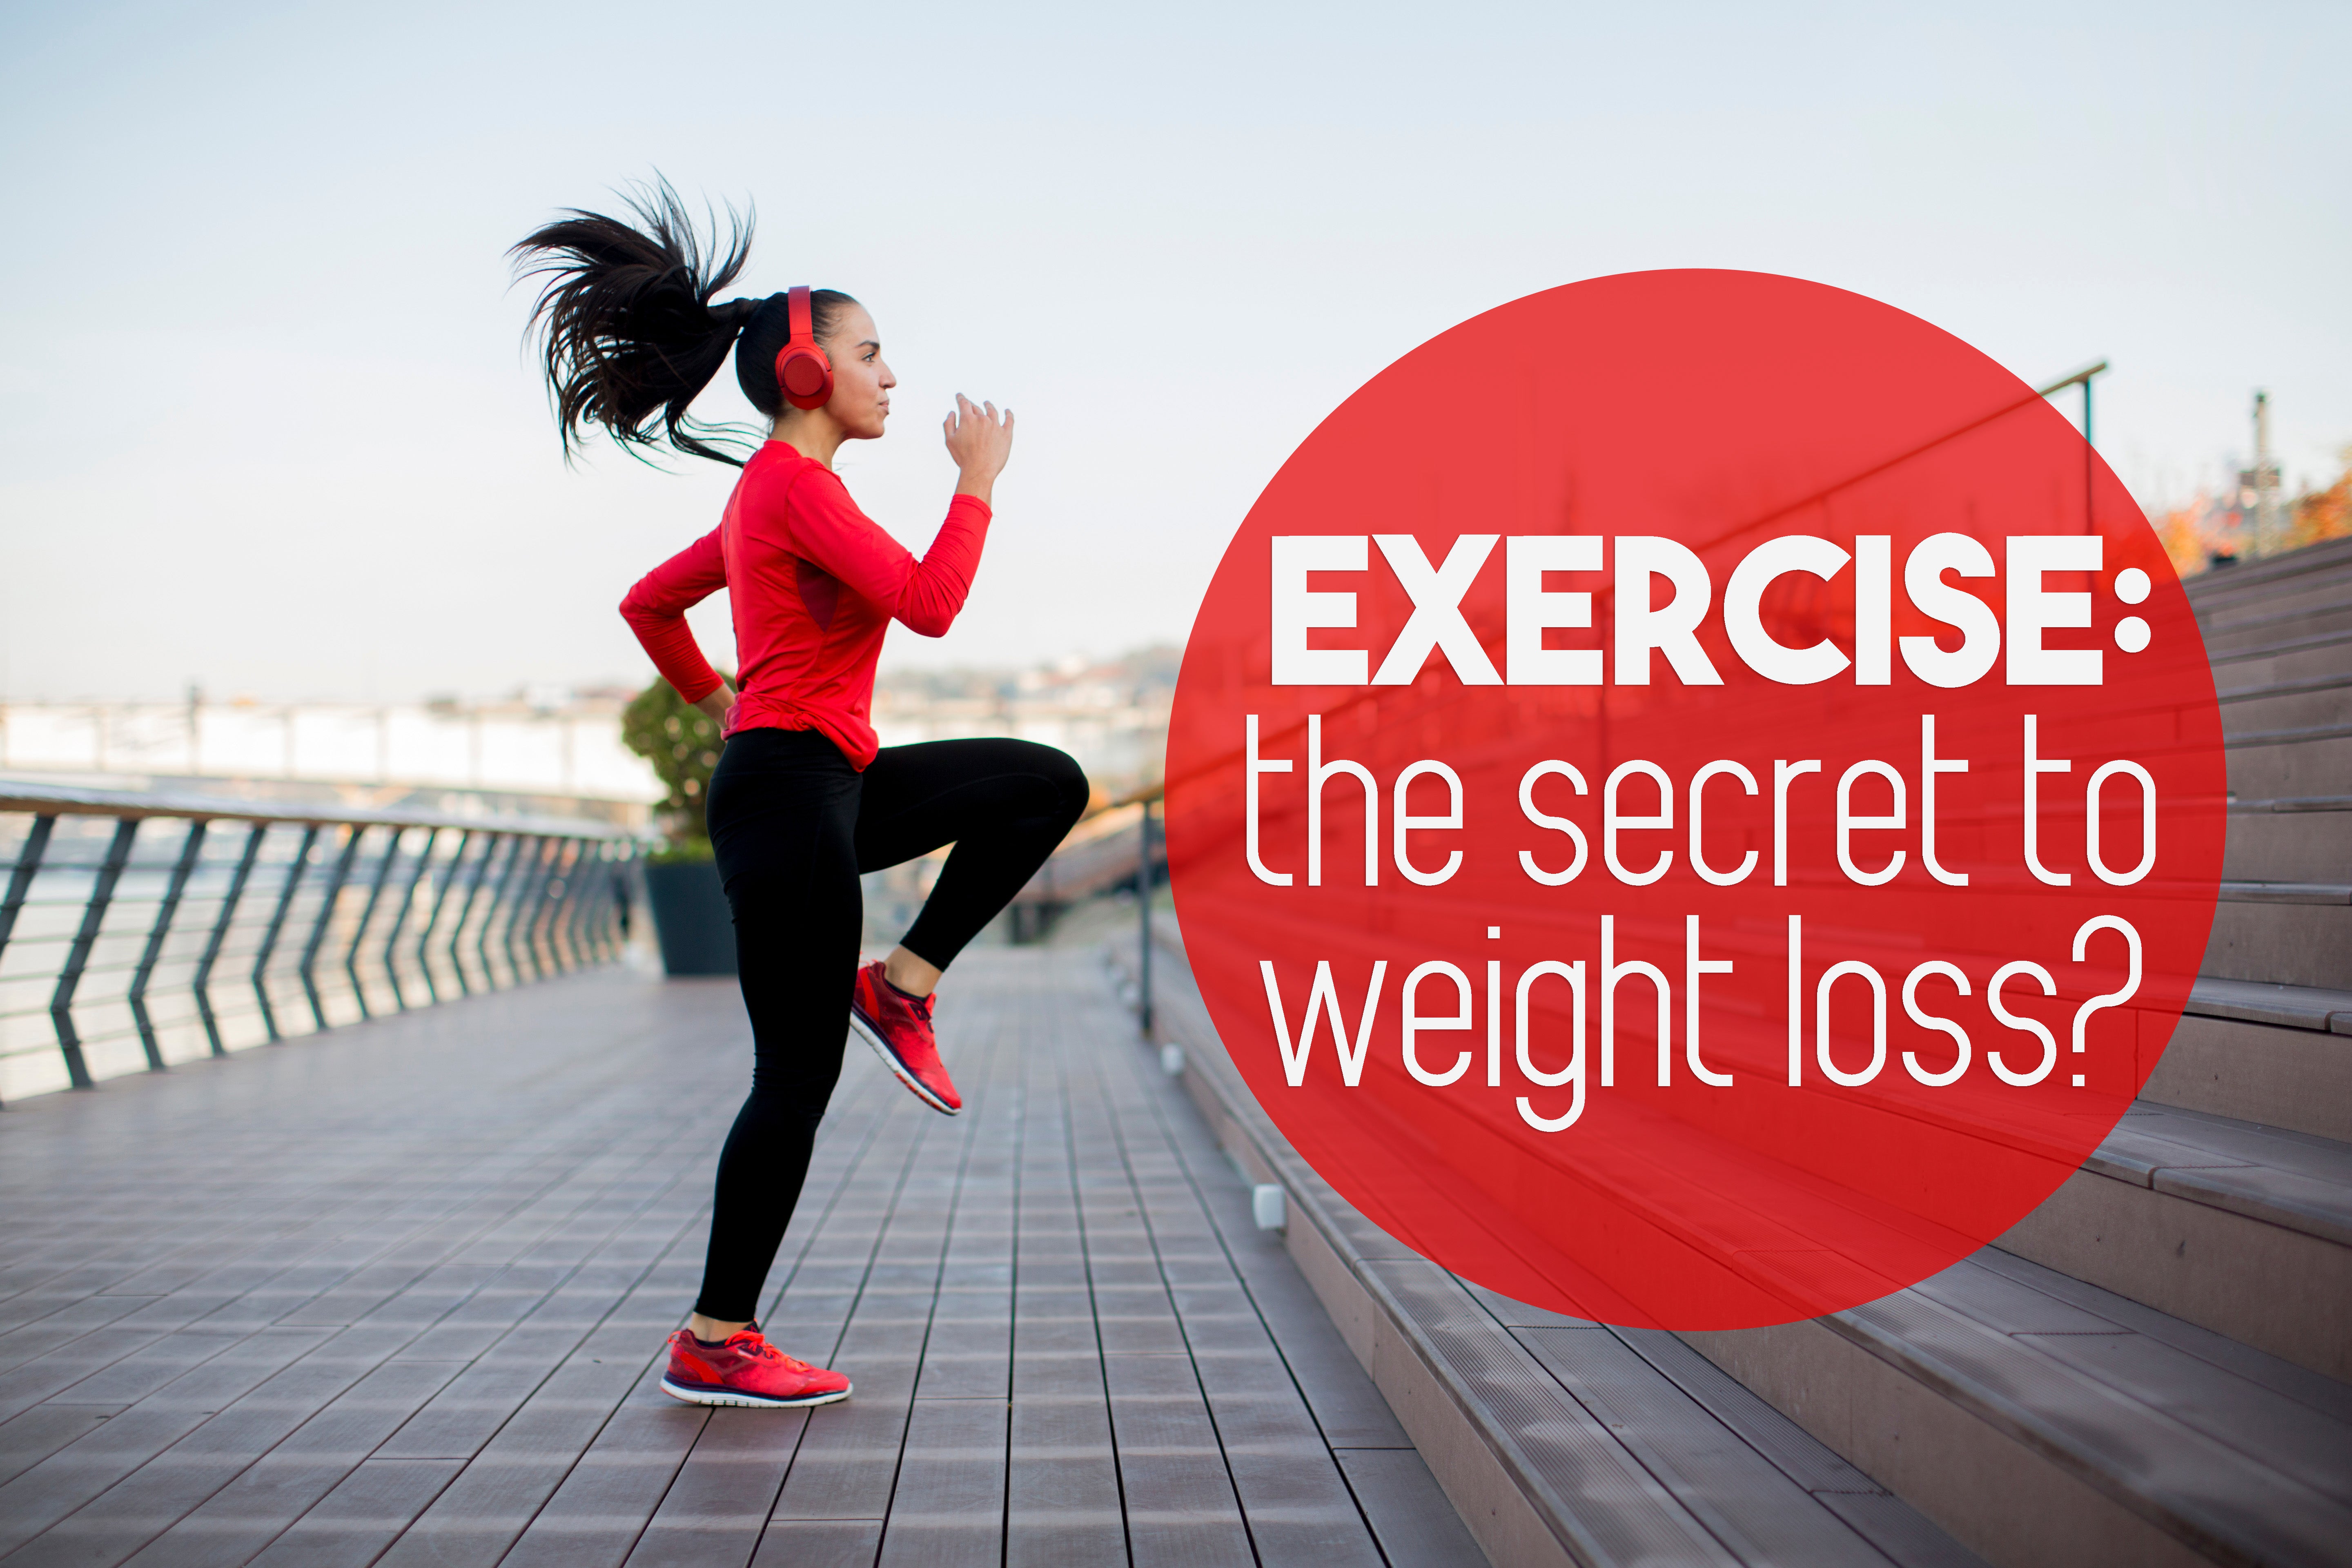 The Secret to Weight Loss